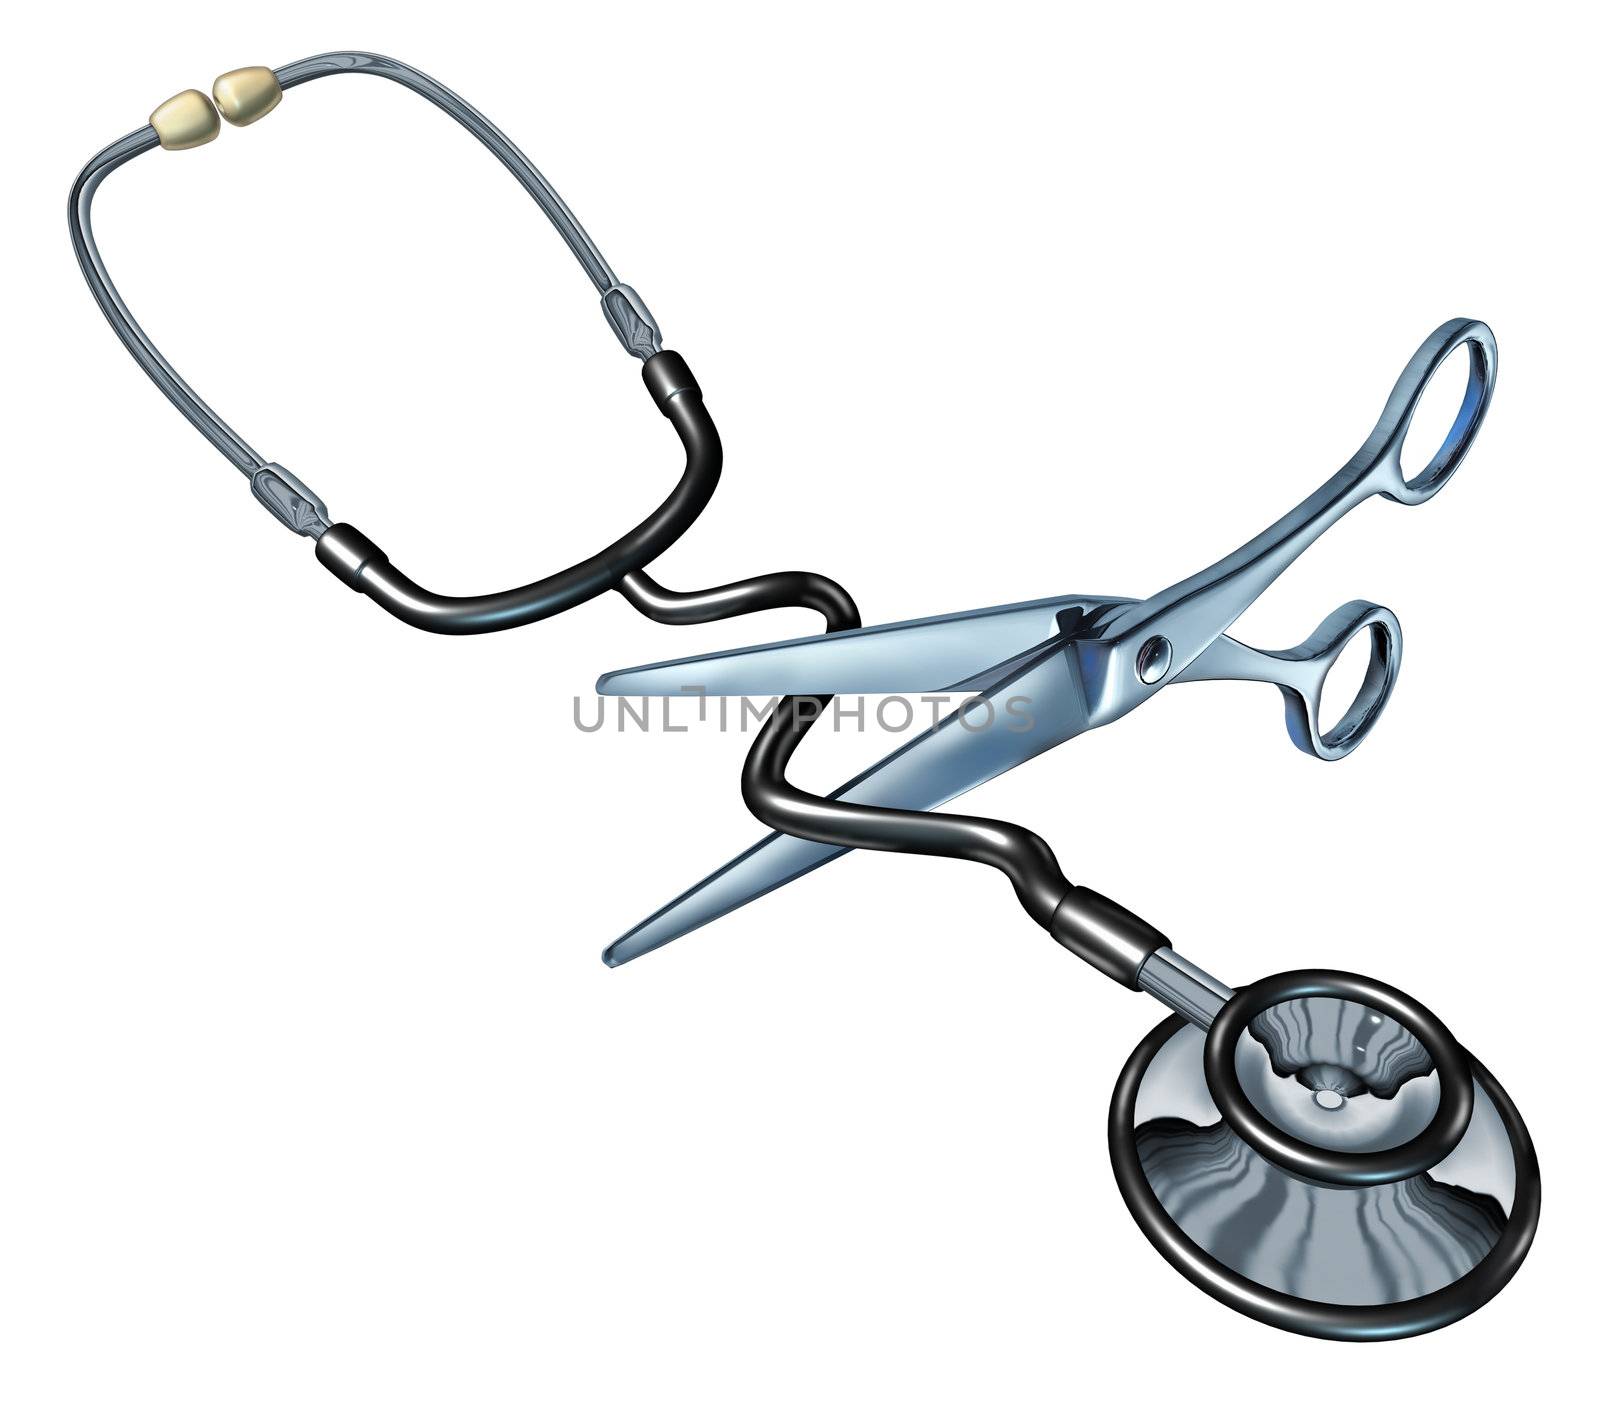 Health care insurance cuts with a three dimensional stethoscope being cut by metal scissors as a medical concept of cutting hospital and medicine costs isolated on a white background.